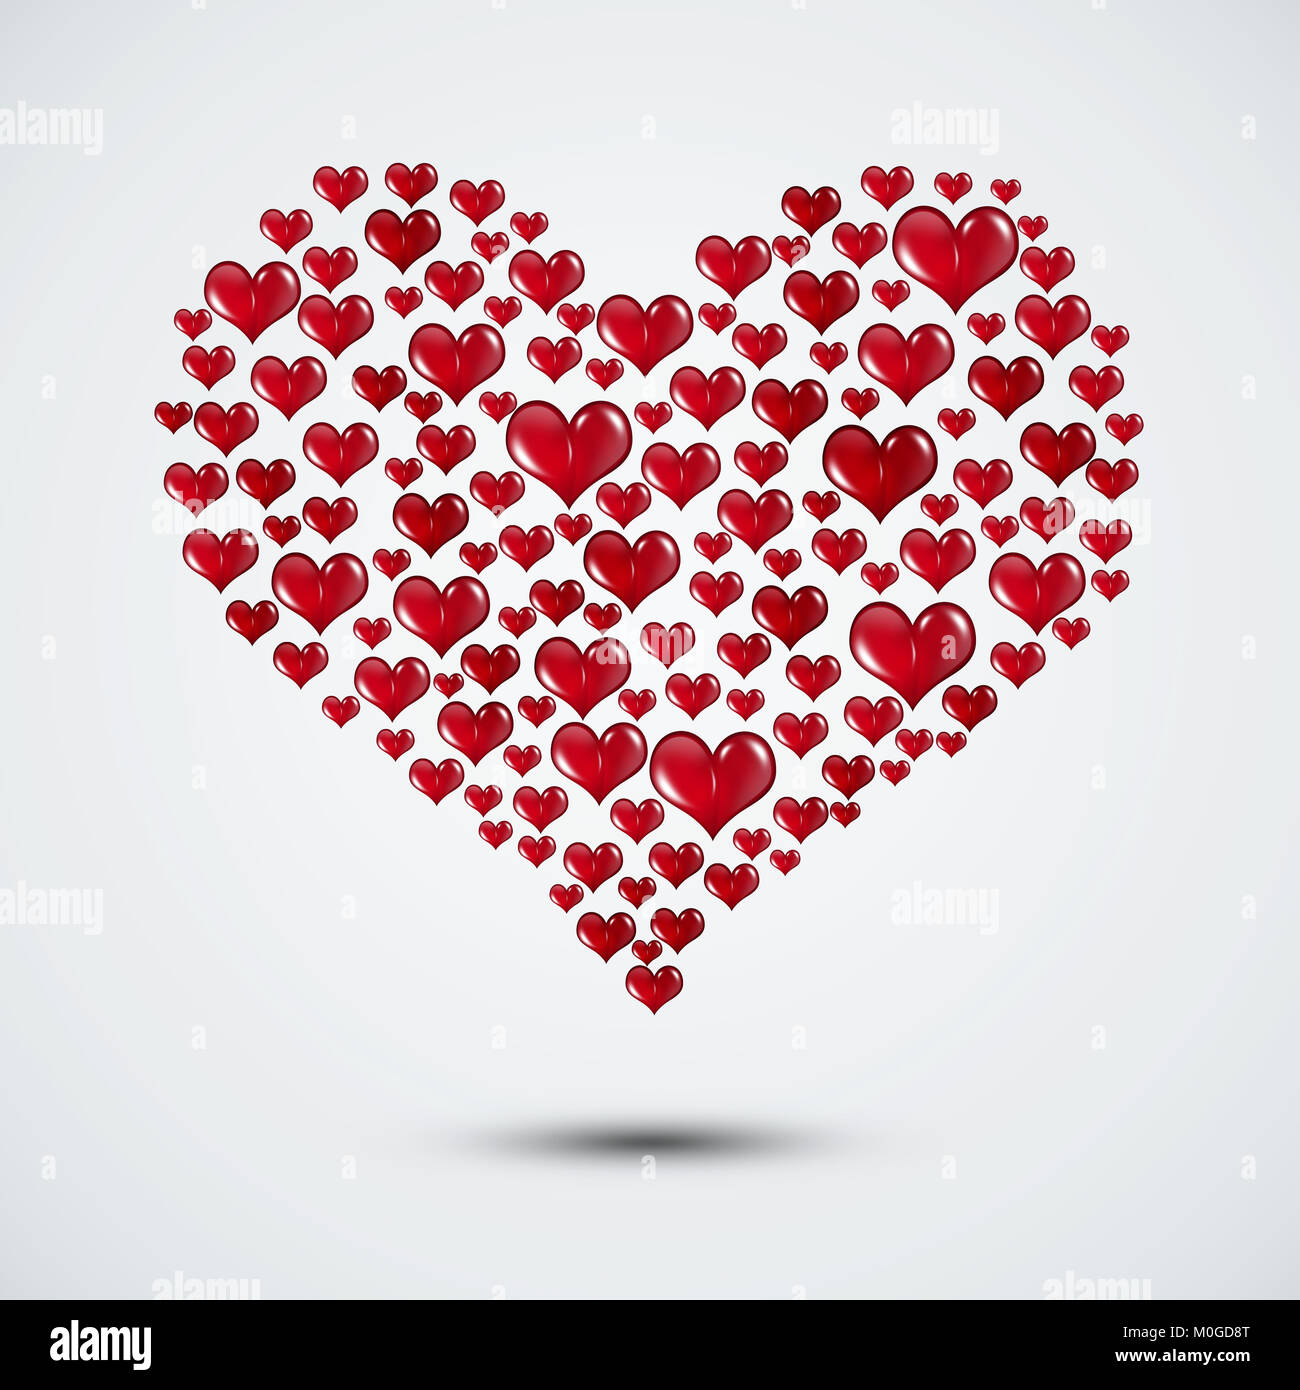 holiday valentine gift background with red hearts shape Stock Photo